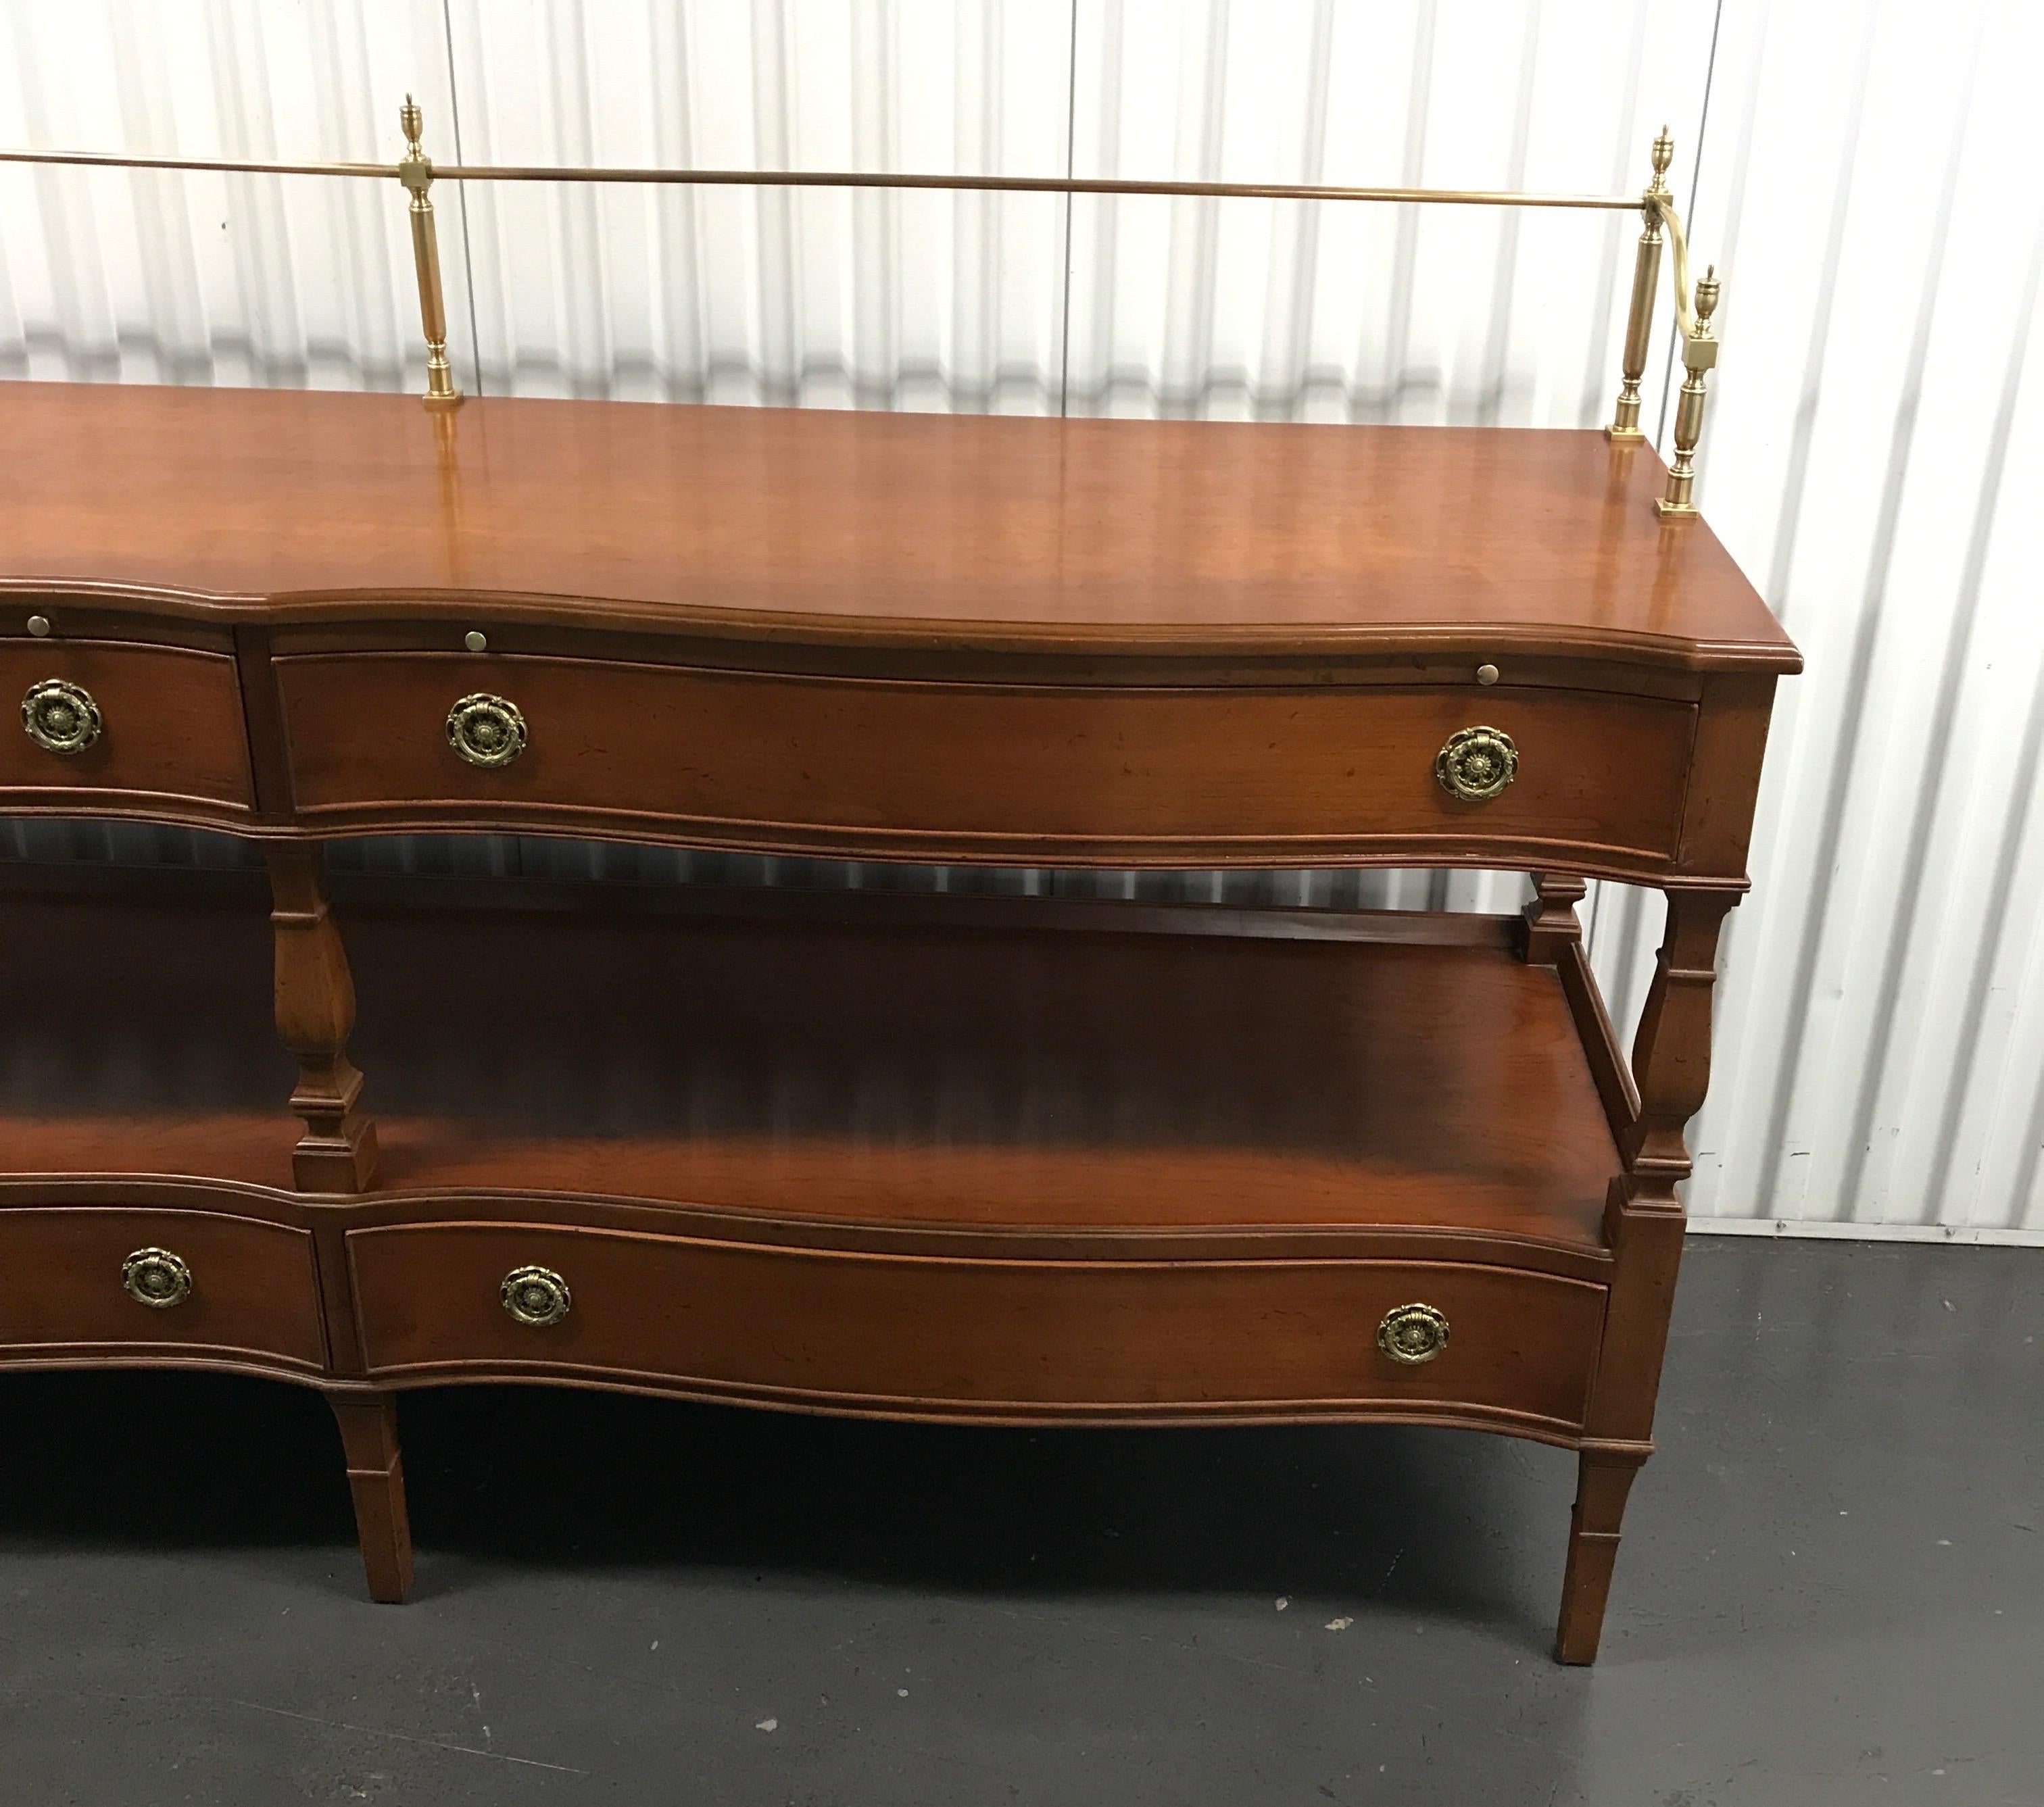 Two tier brass galleried serpentine sideboard with four drawers. Height to top of brass gallery is 42.75.